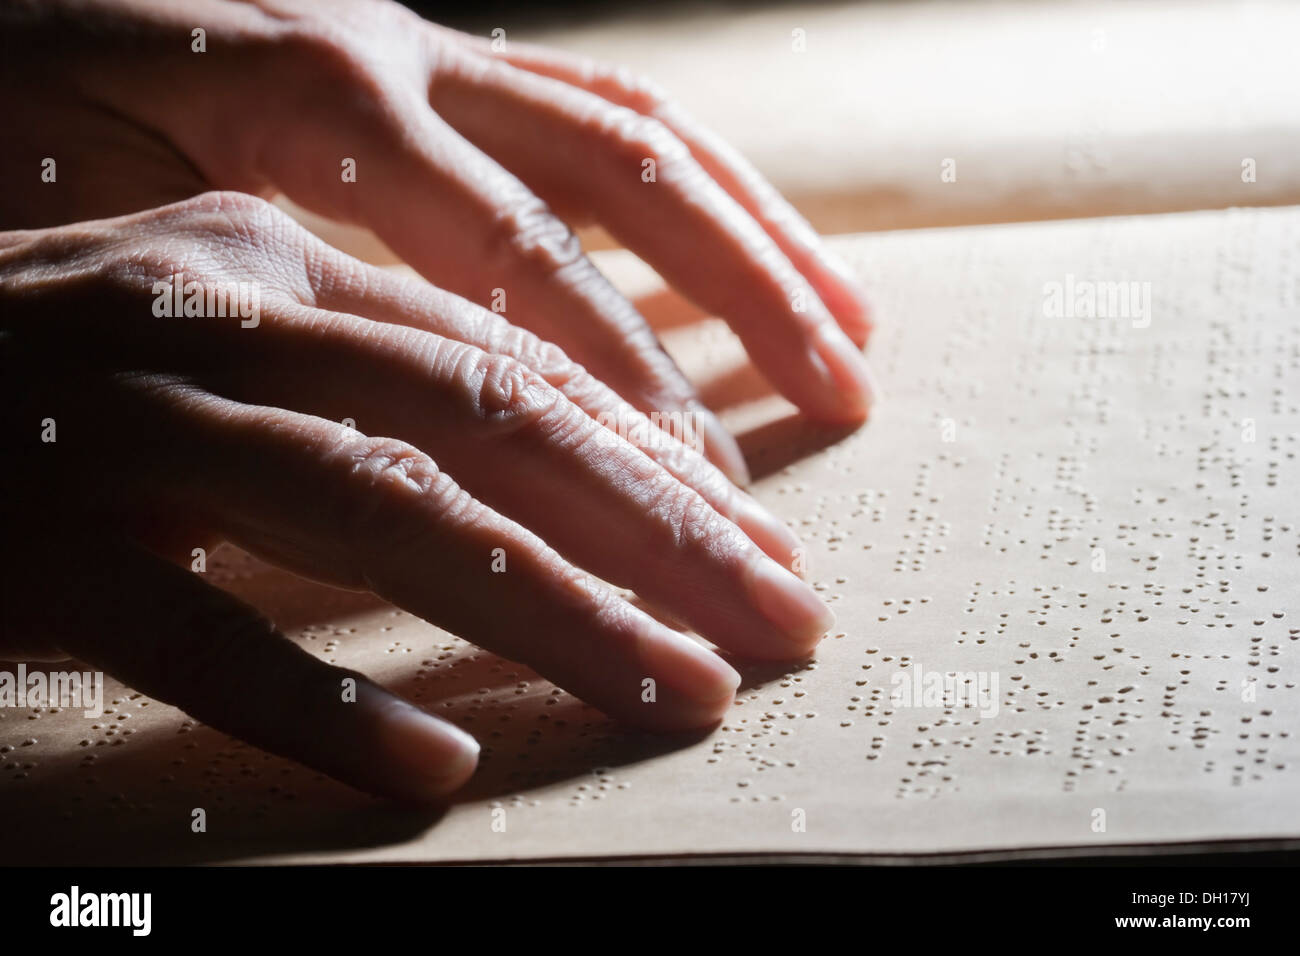 Close up of Hispanic person reading Braille Stock Photo